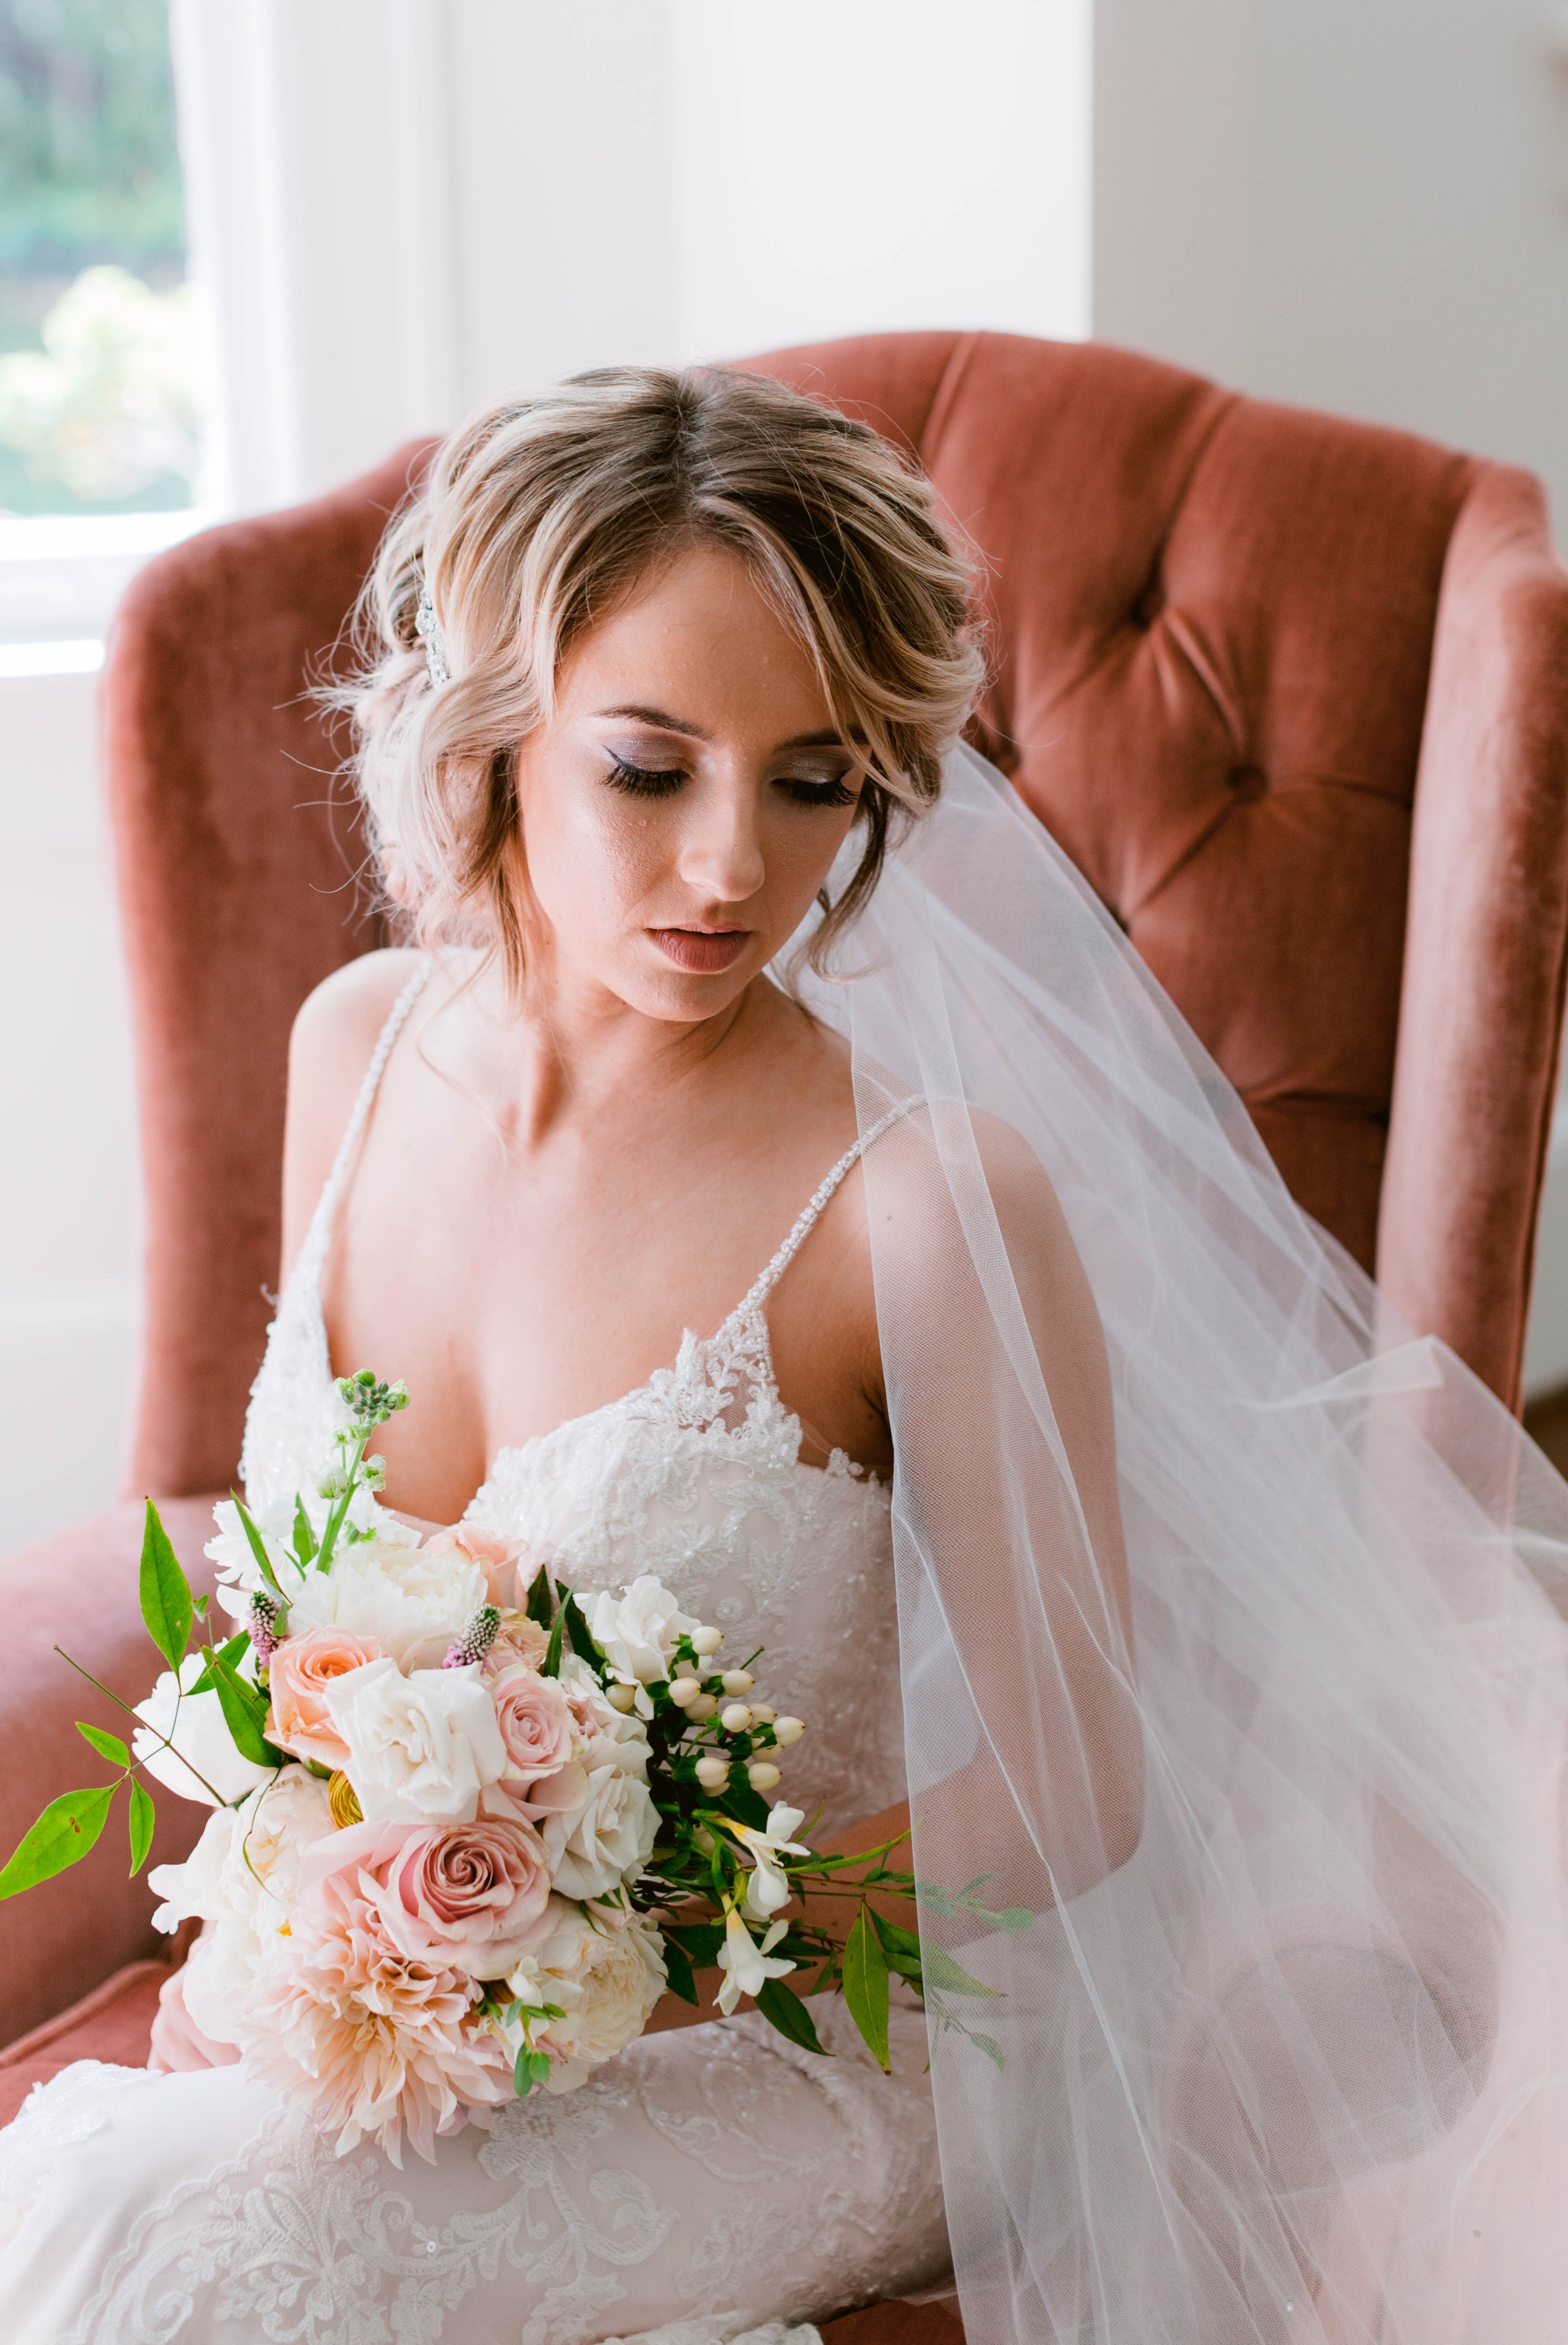  Allison Howell - Indoor Natural Light Bridal Portraits by a window with a white backdrop - classic bride - Honolulu, Oahu, Hawaii Wedding Photographer 